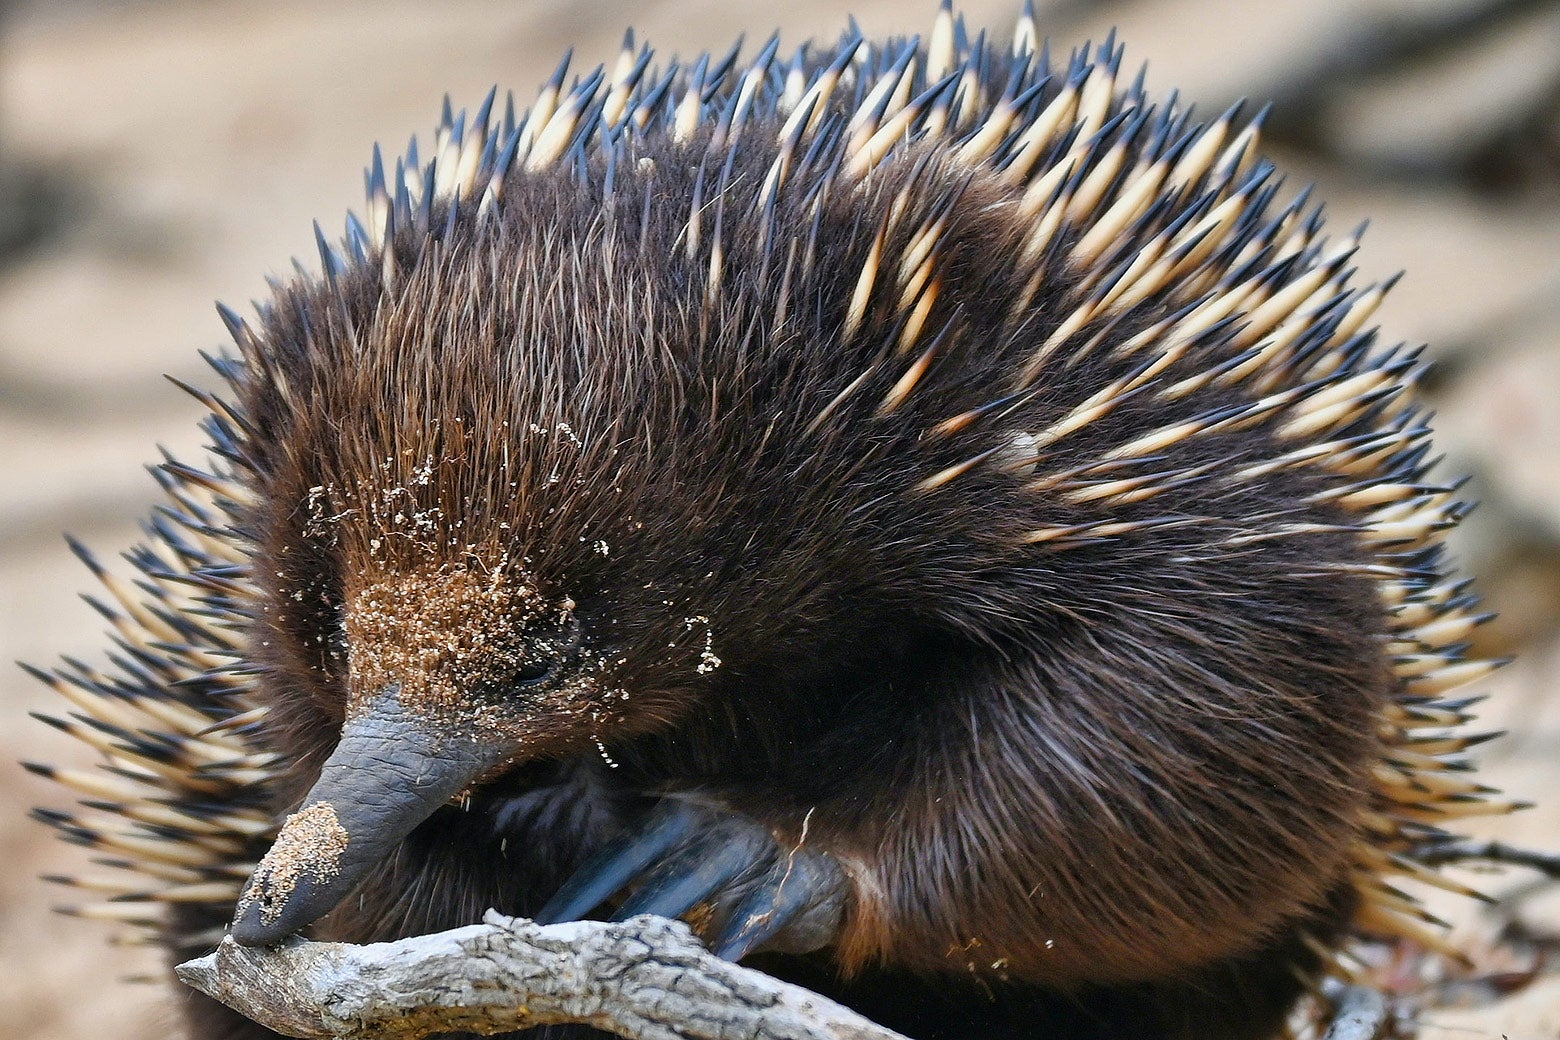 Echidnas Blow Snot Bubbles to Cool Down. Could We?